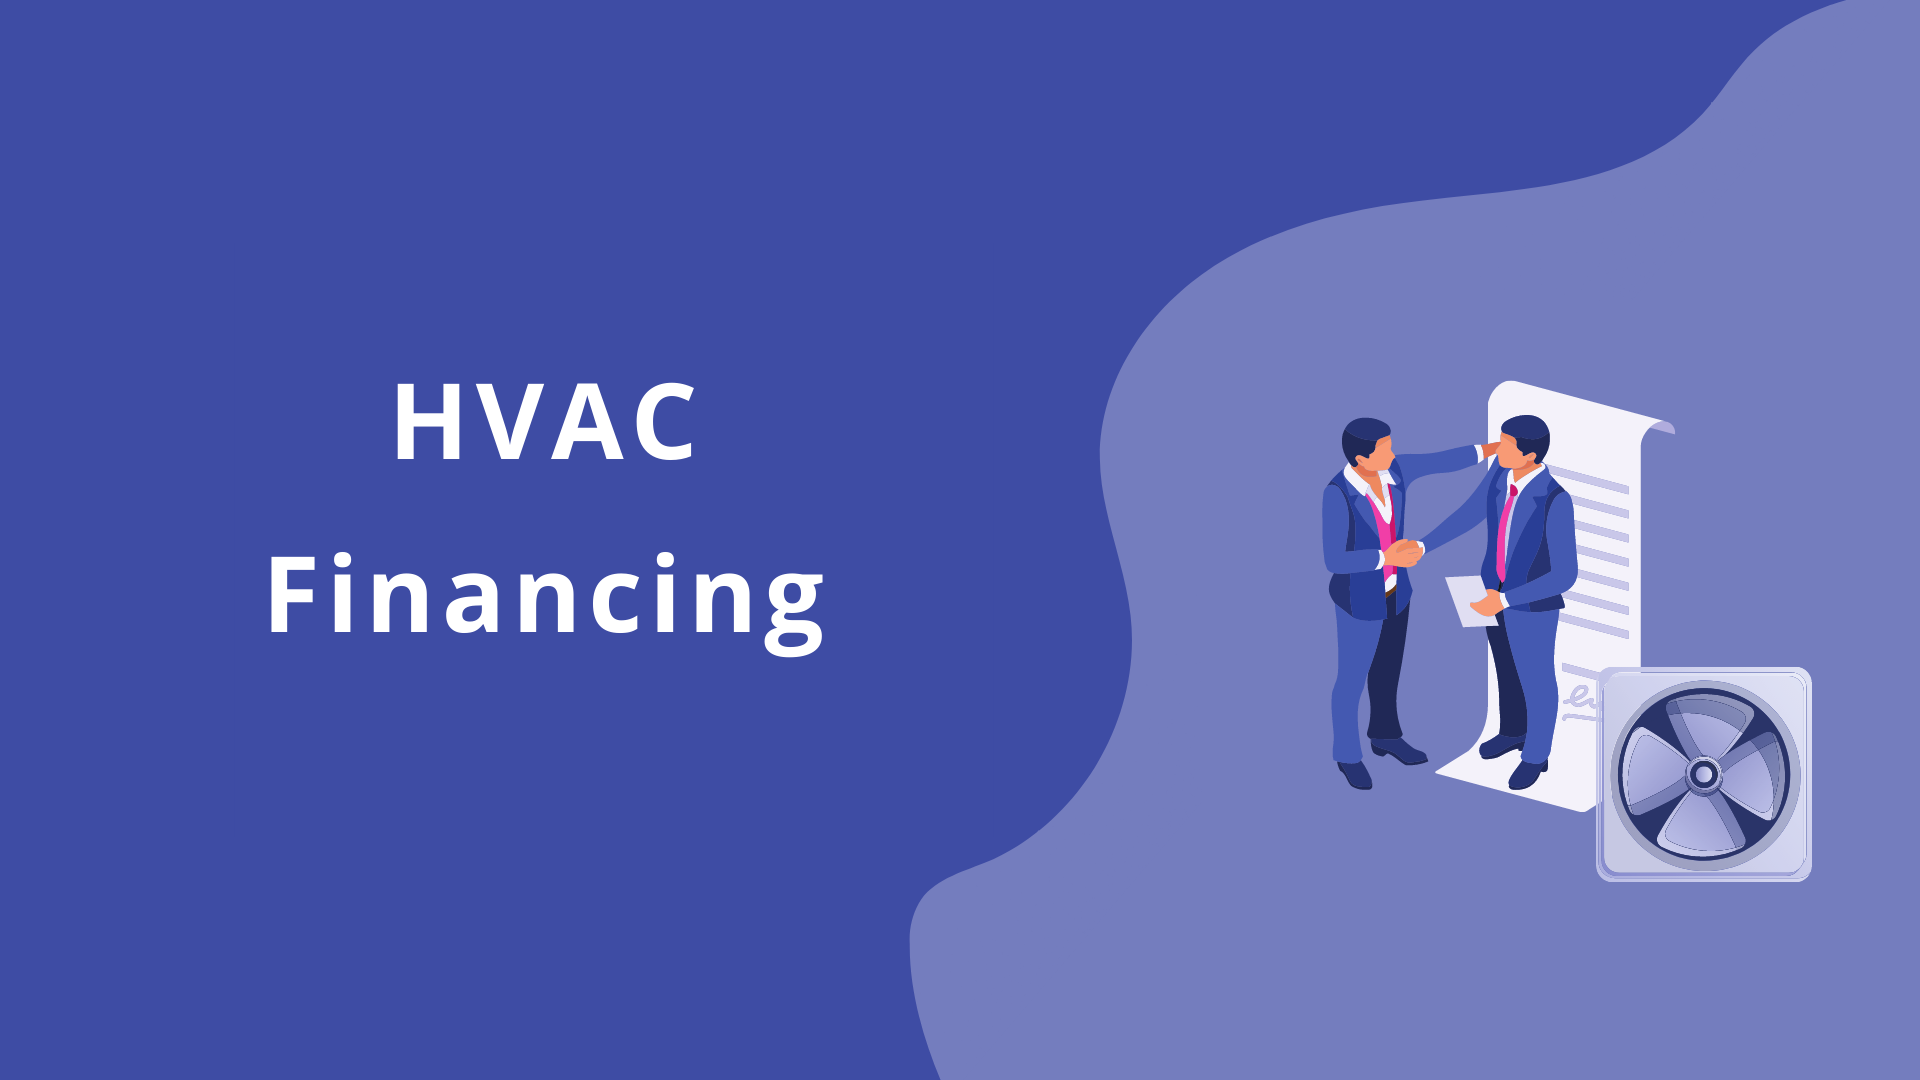 Implementing HVAC Financing in Your Company